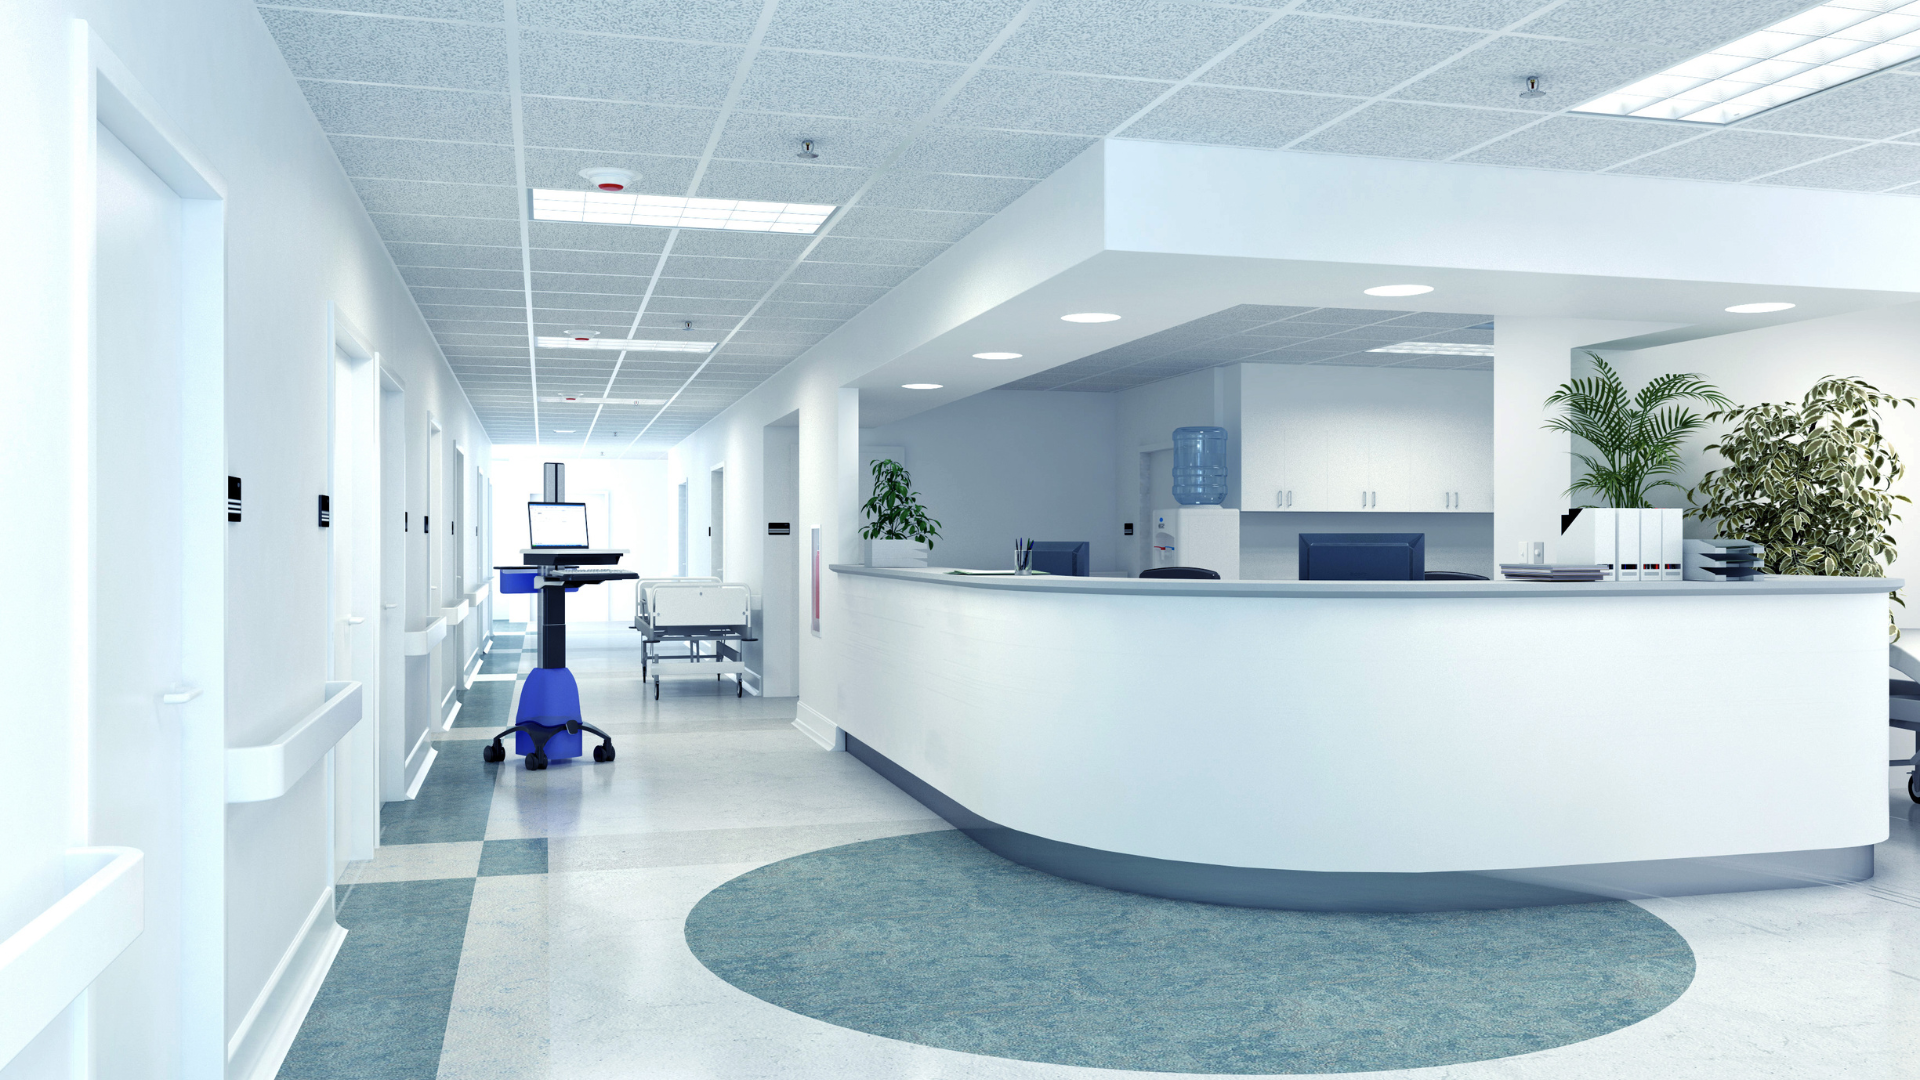 Painting and Coating Solutions for High-Traffic Hospital Areas